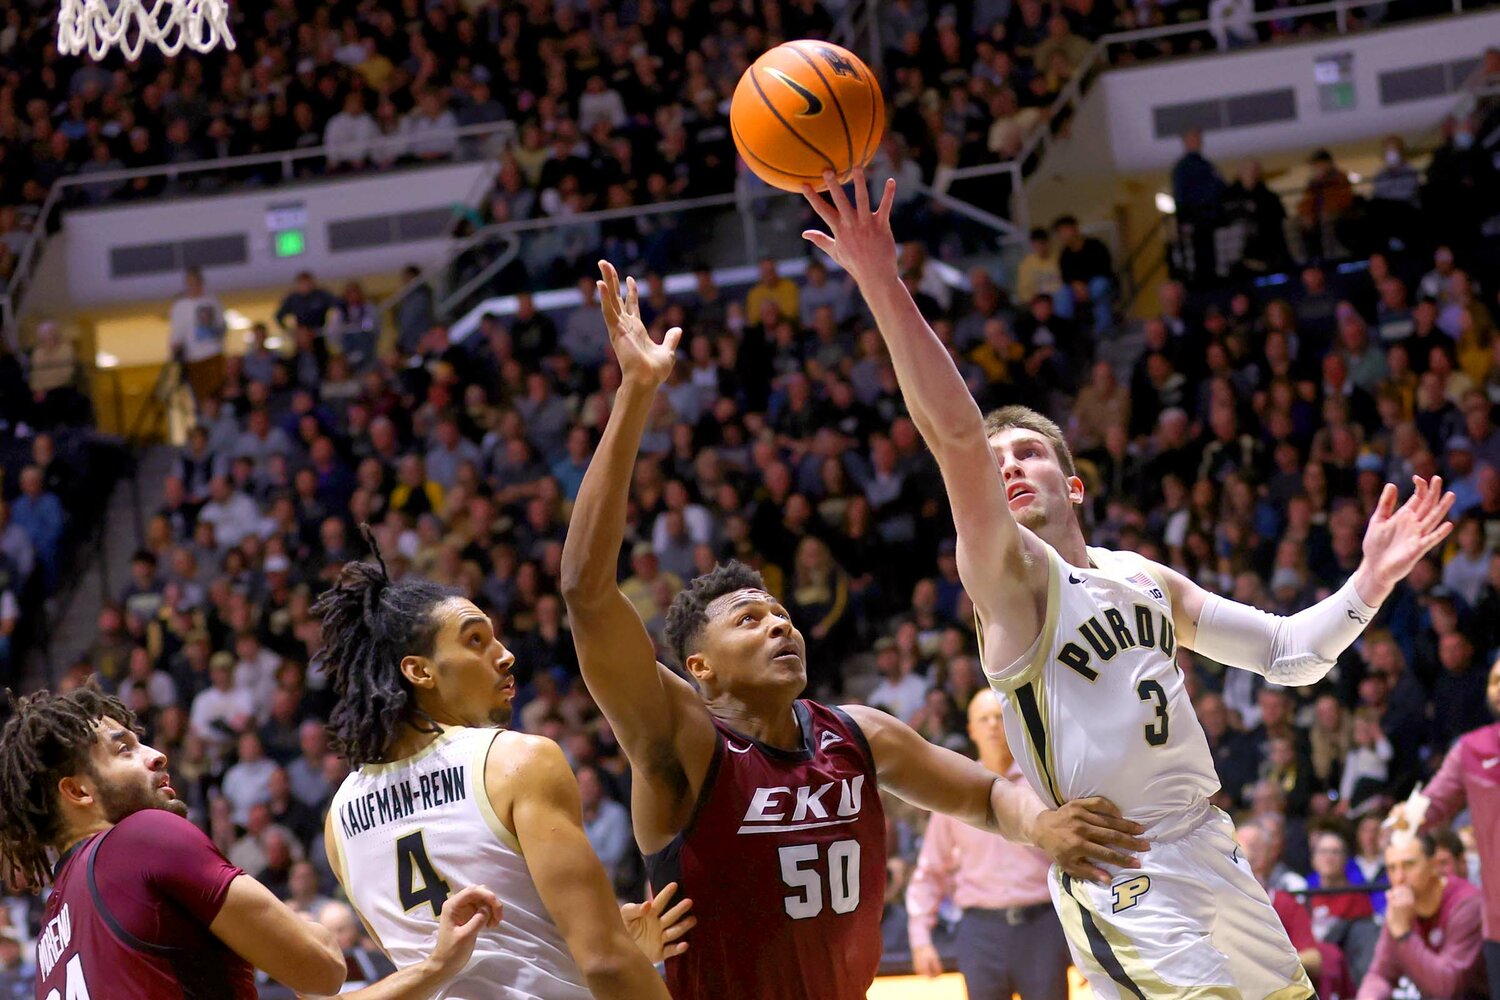 Braden Smith of Purdue - scooping a lay-up over Isaiah Cozart of Eastern Kentucky